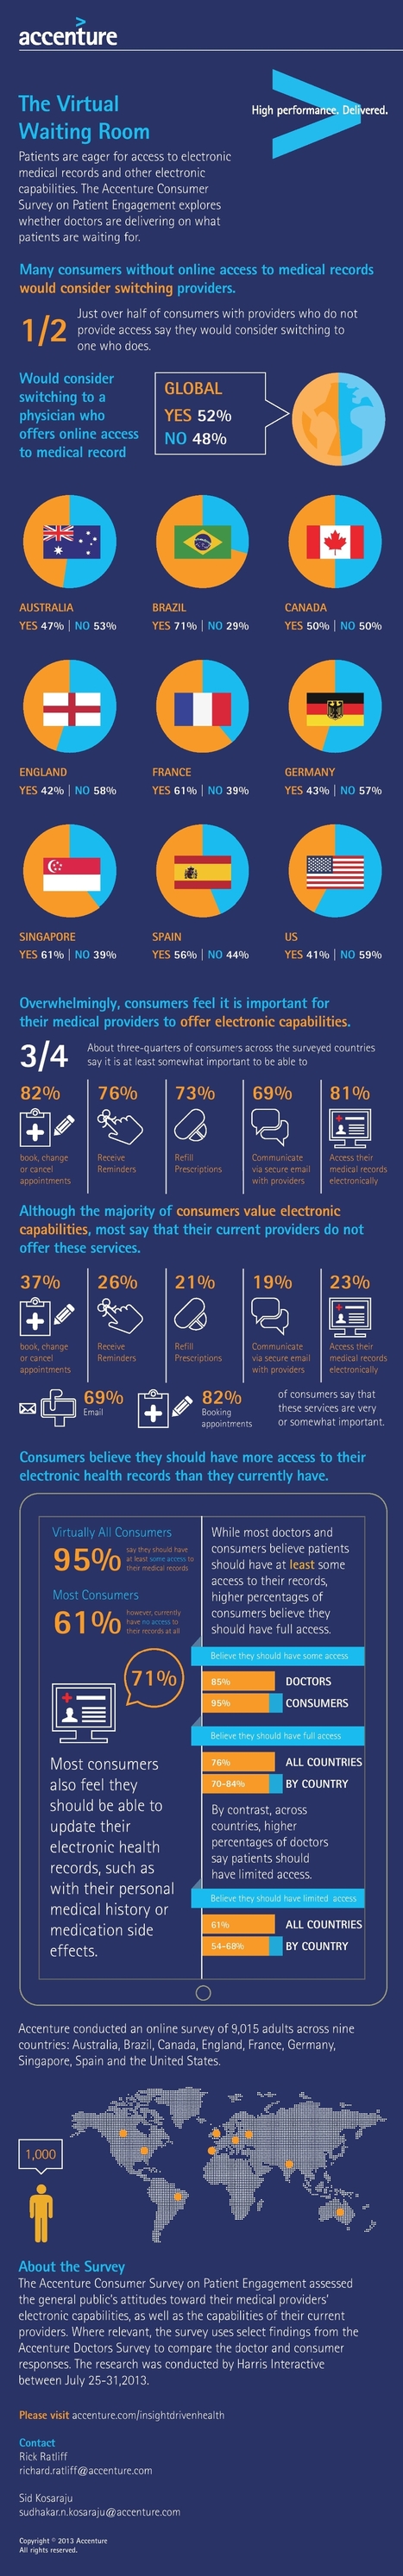 Infographic: Patients Want Access To Their Electronic Medical Records | #eHealthPromotion, #SaluteSocial | Scoop.it